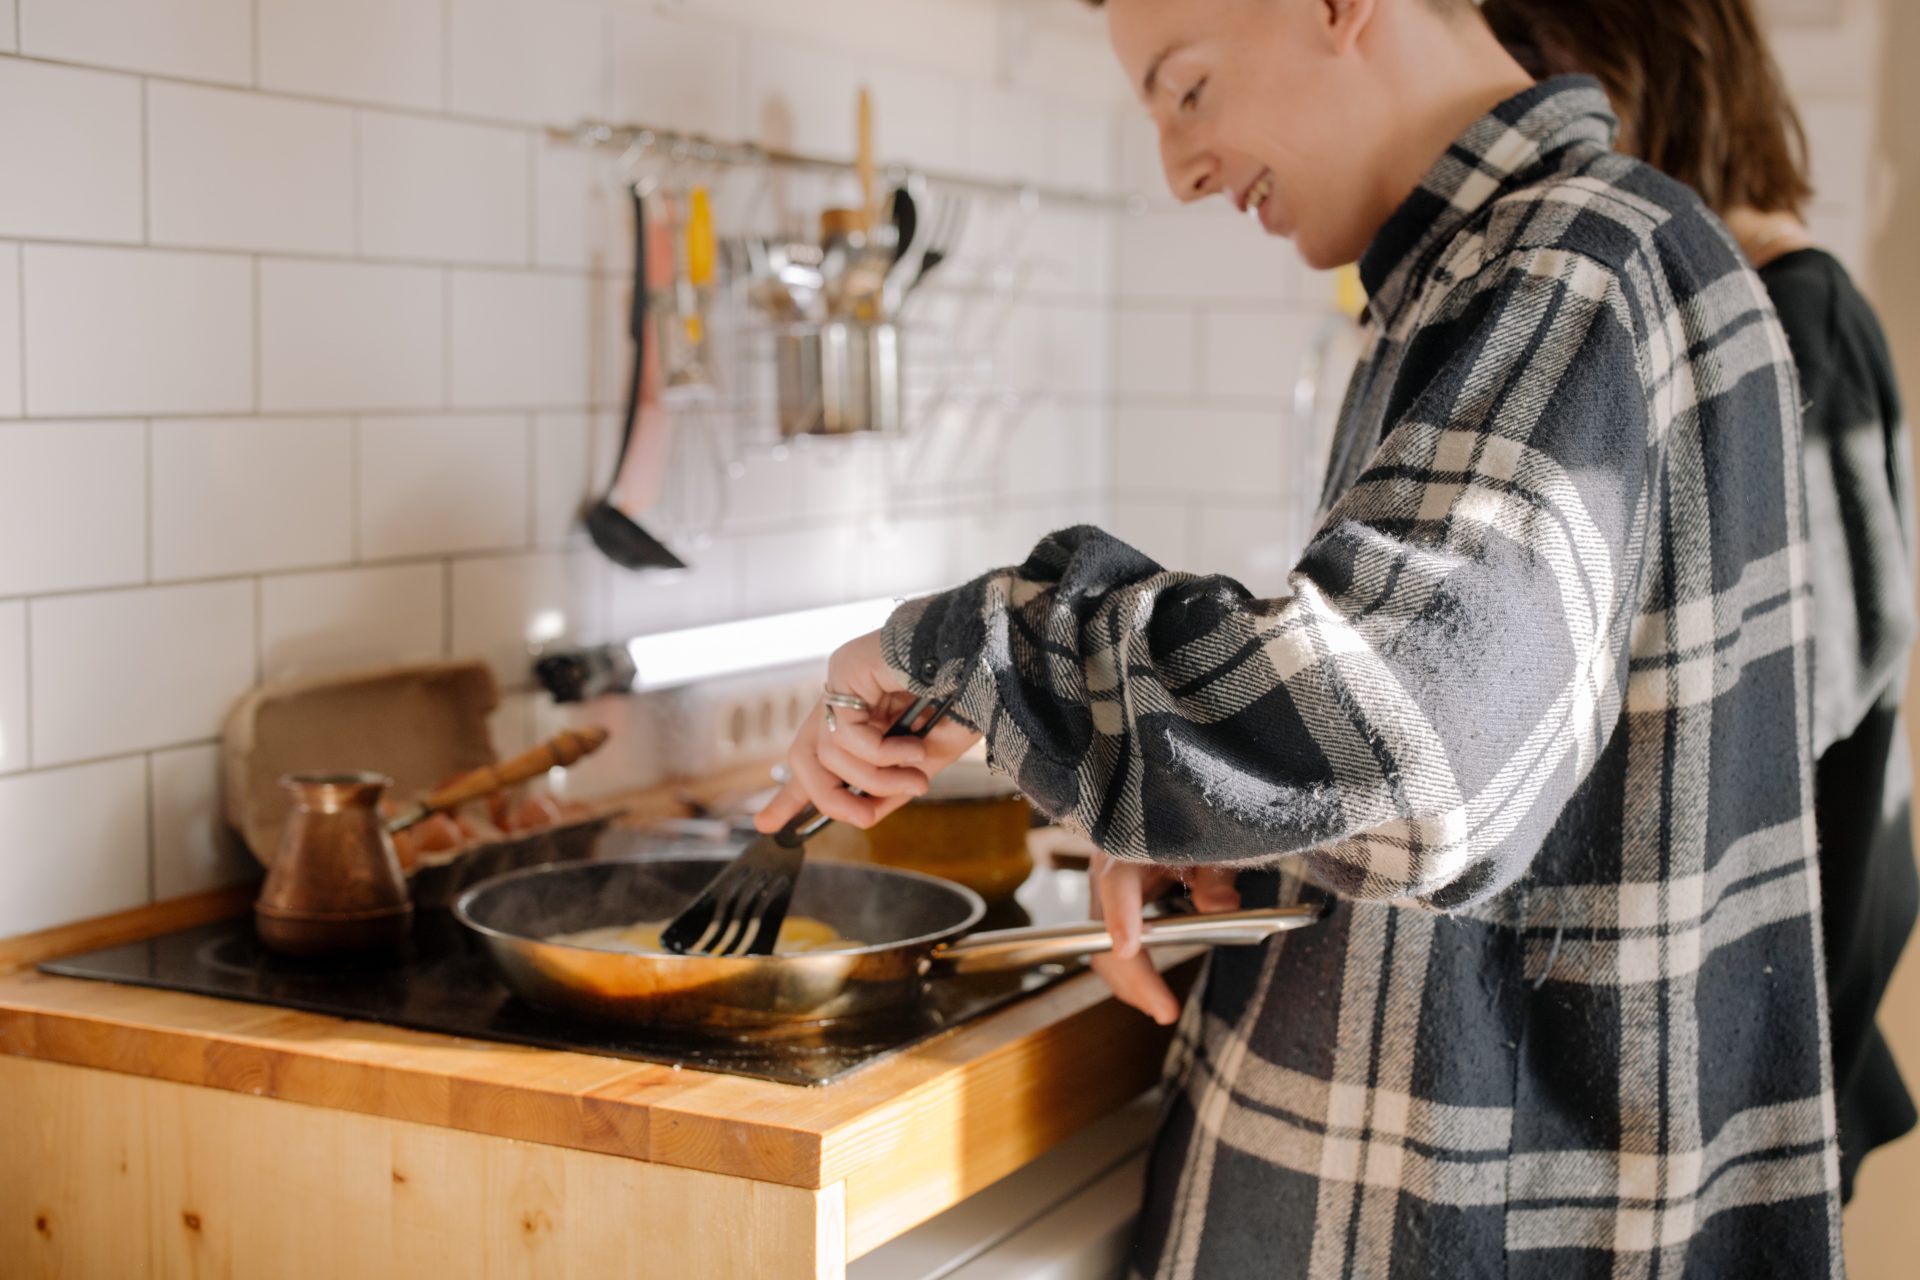 What to know about buying cookware